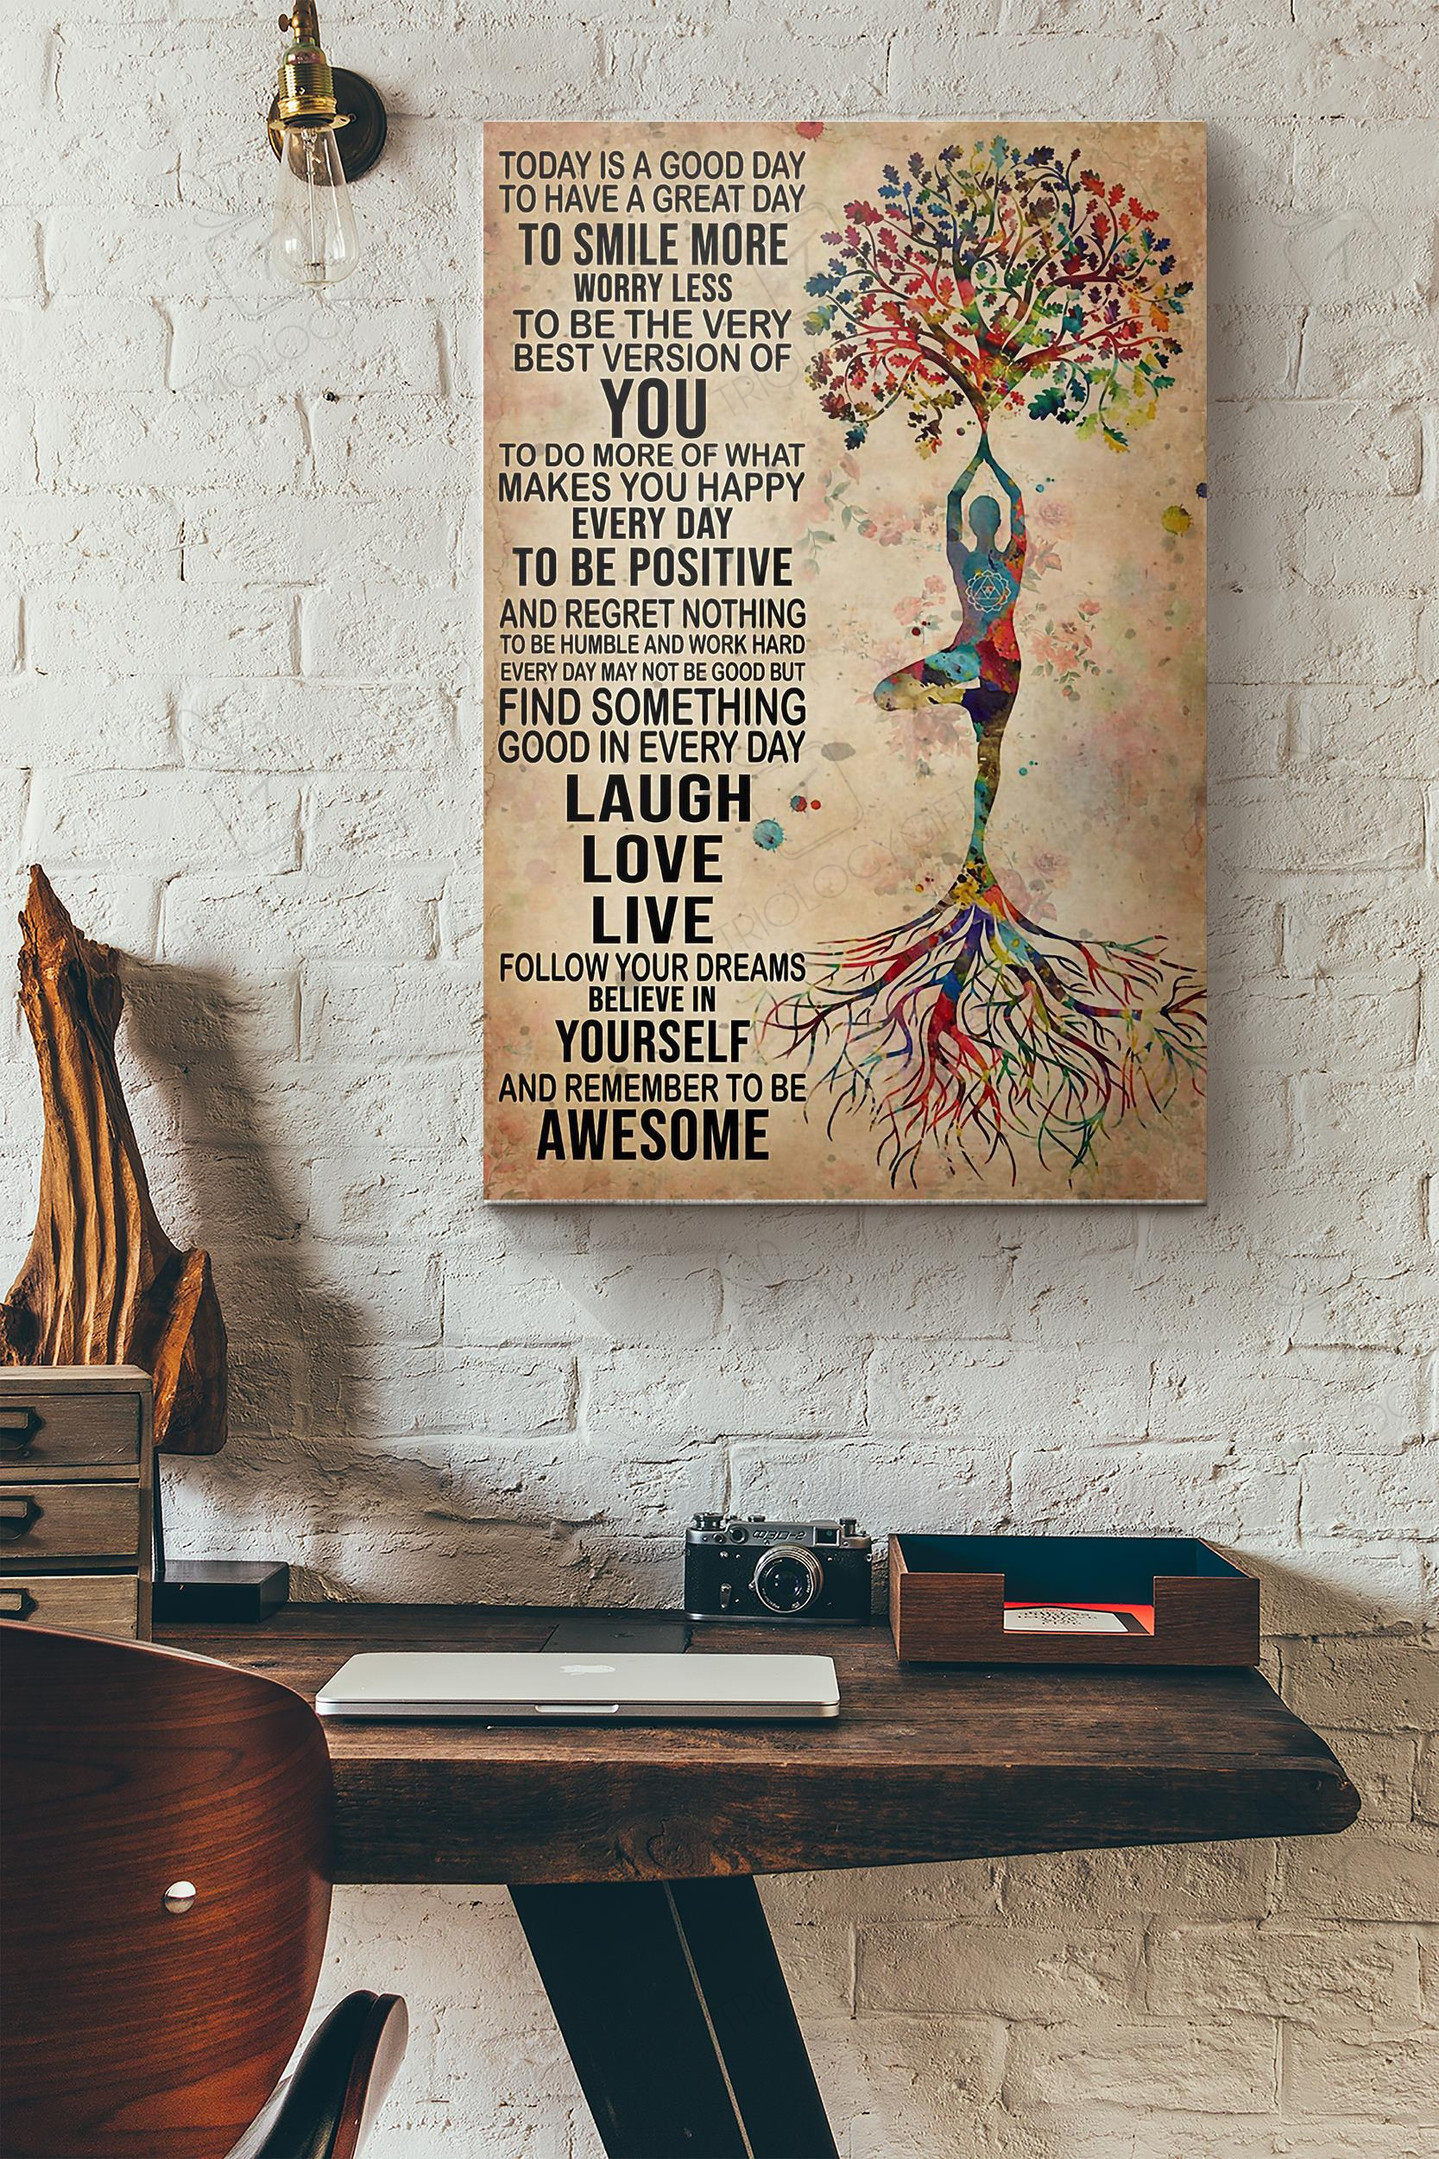 Tree Yoga Today Is A Good Day To Smile More Worry Less To Be The Very Best Version Of You Canvas Painting Ideas, Canvas Hanging Prints, Gift Idea Framed Prints, Canvas Paintings Wrapped Canvas 8x10